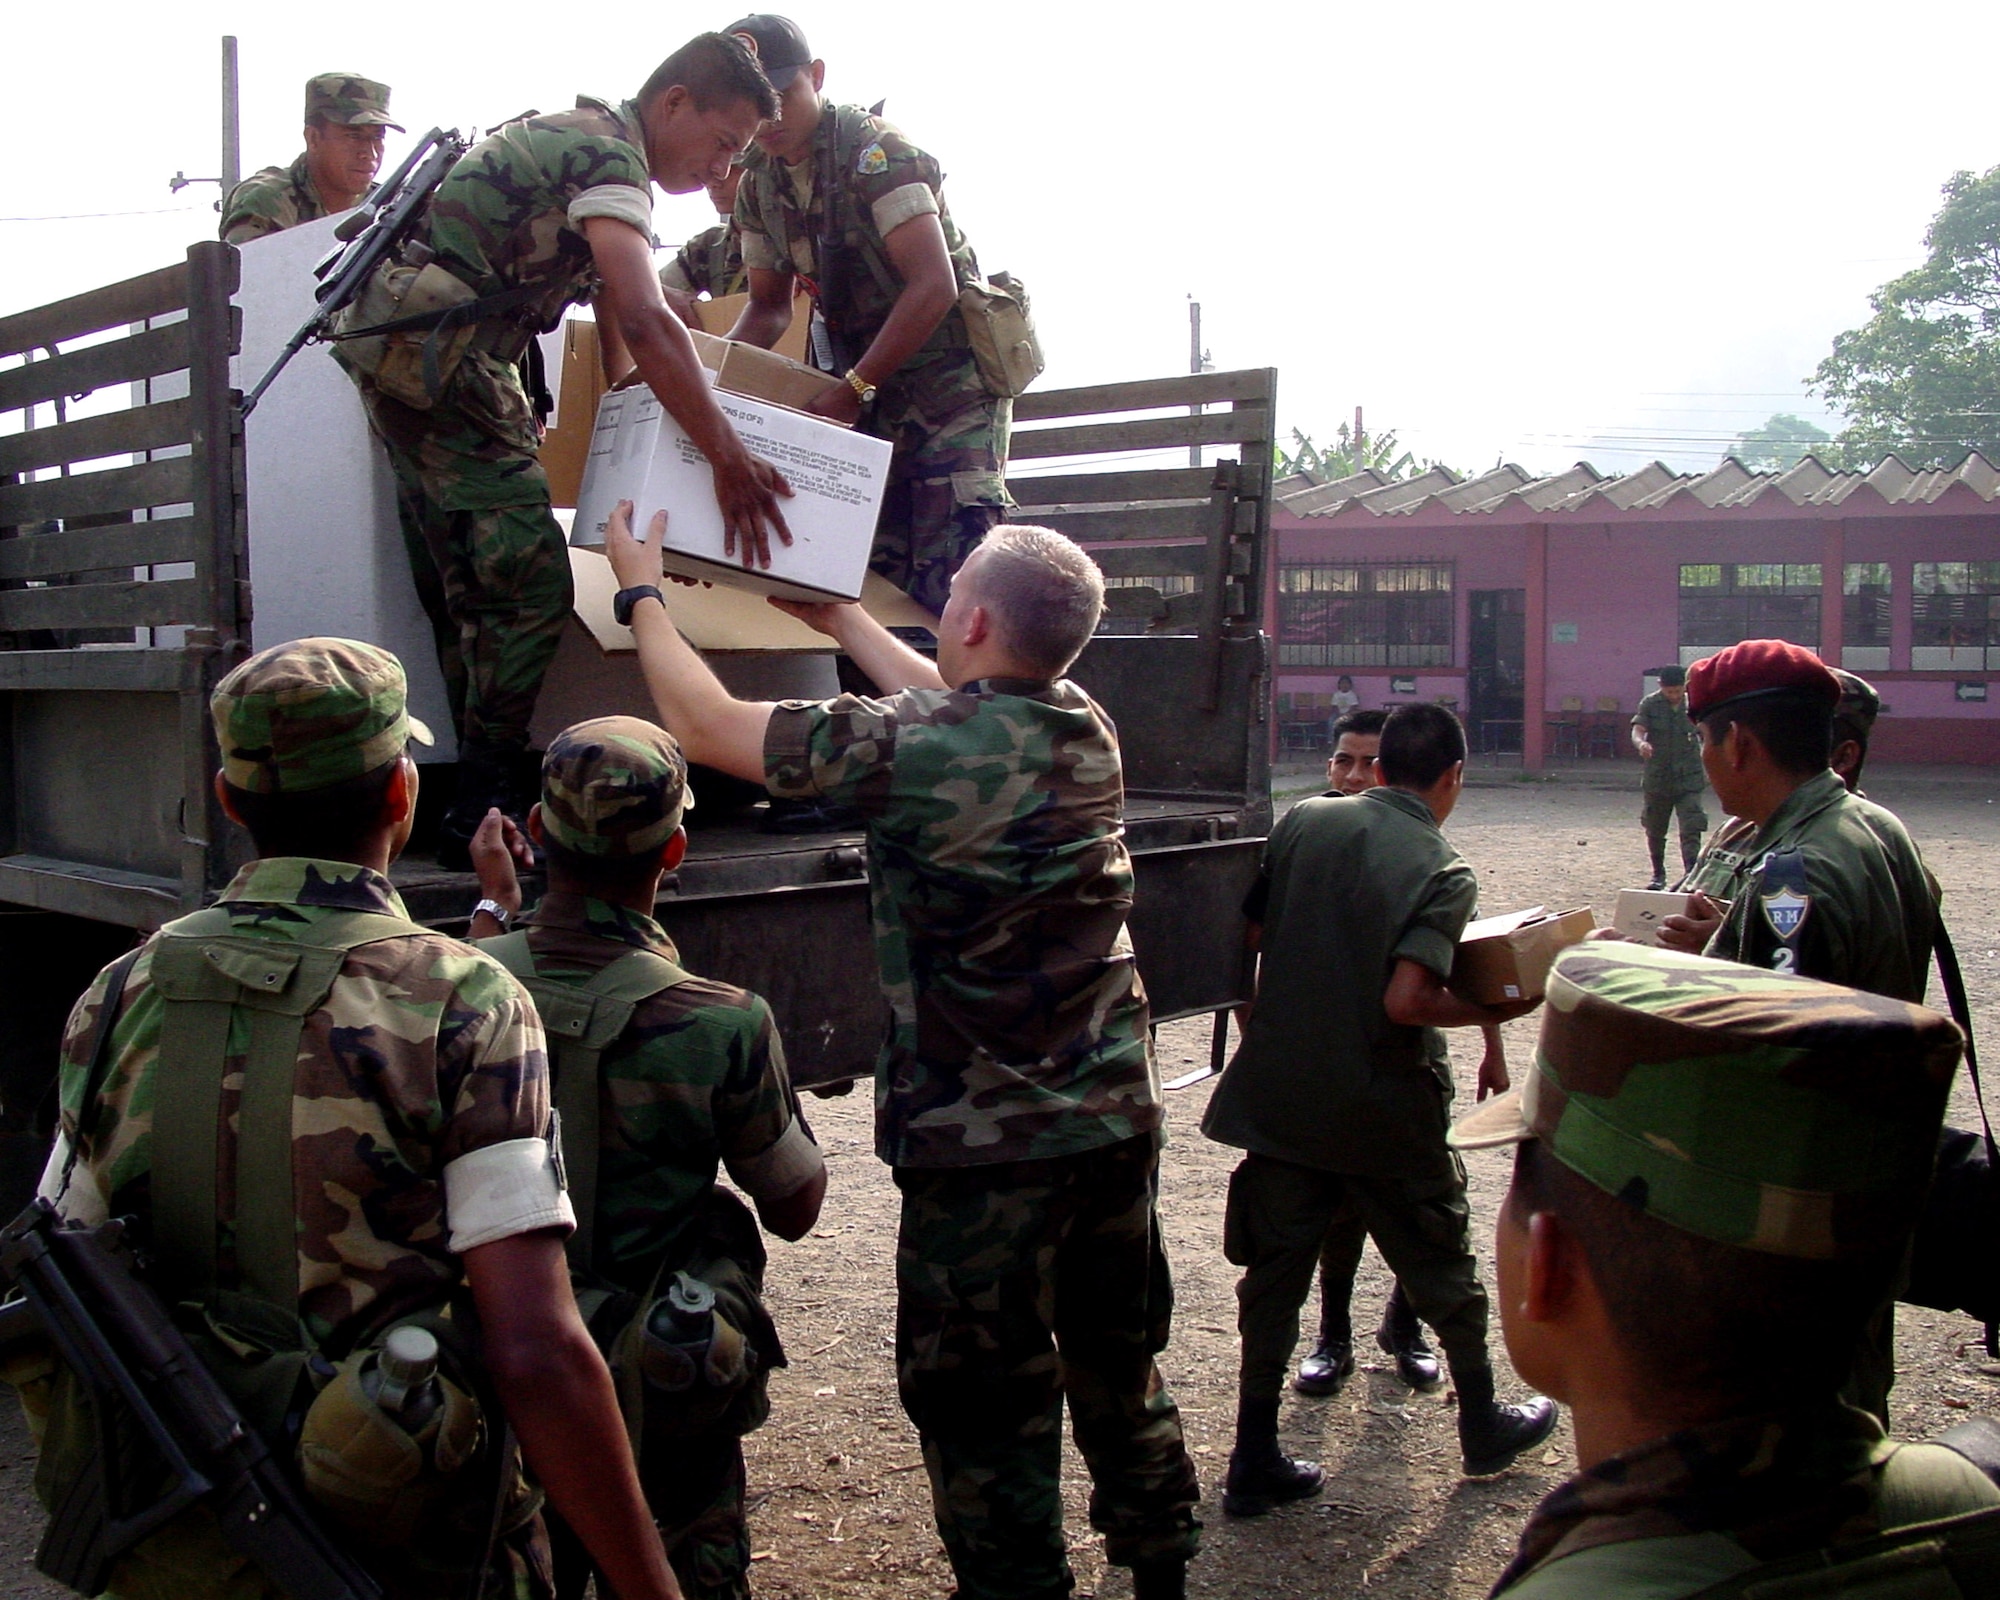 Capt. (Dr.) Daniel Rohweder helps Guatemalan soldiers unload medical supplies during a humanitarian mission to some of the poorest regions of Guatemala. Captain Rohweder, a physician from Vandenberg Air Force Base, Calif.,  was one of 13 medical professionals from various Air Force Space Command bases deployed to the country. More than 8,000 patients during the 10-day mission in April. (U.S. Air Force photo)                       